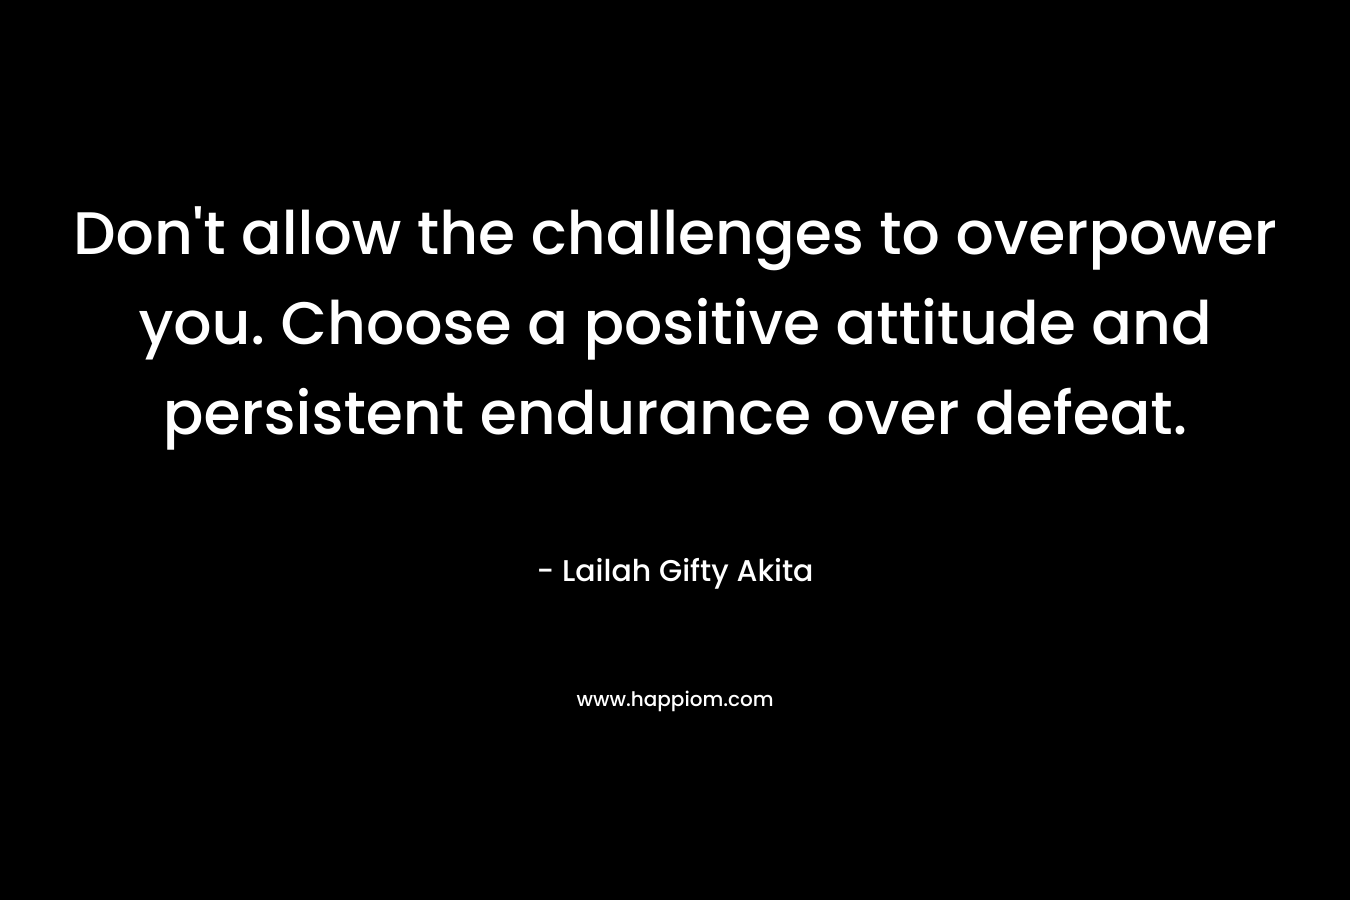 Don't allow the challenges to overpower you. Choose a positive attitude and persistent endurance over defeat.